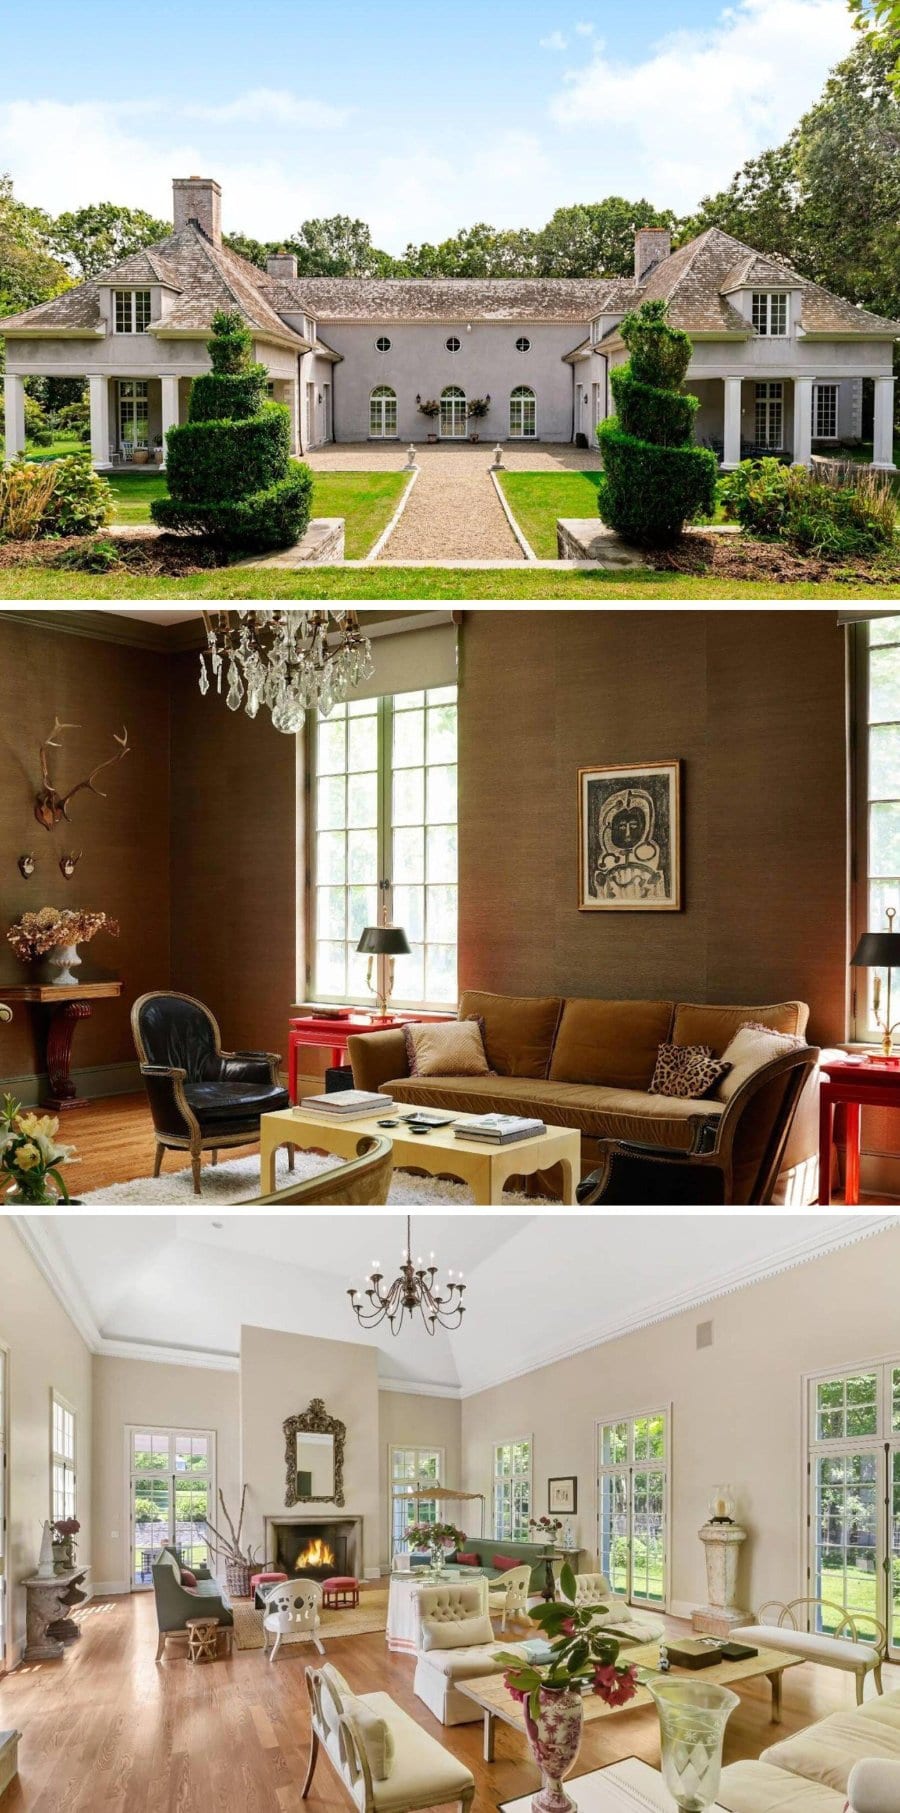 Interior and exterior images of the Southampton Manor, a mansion in New York 